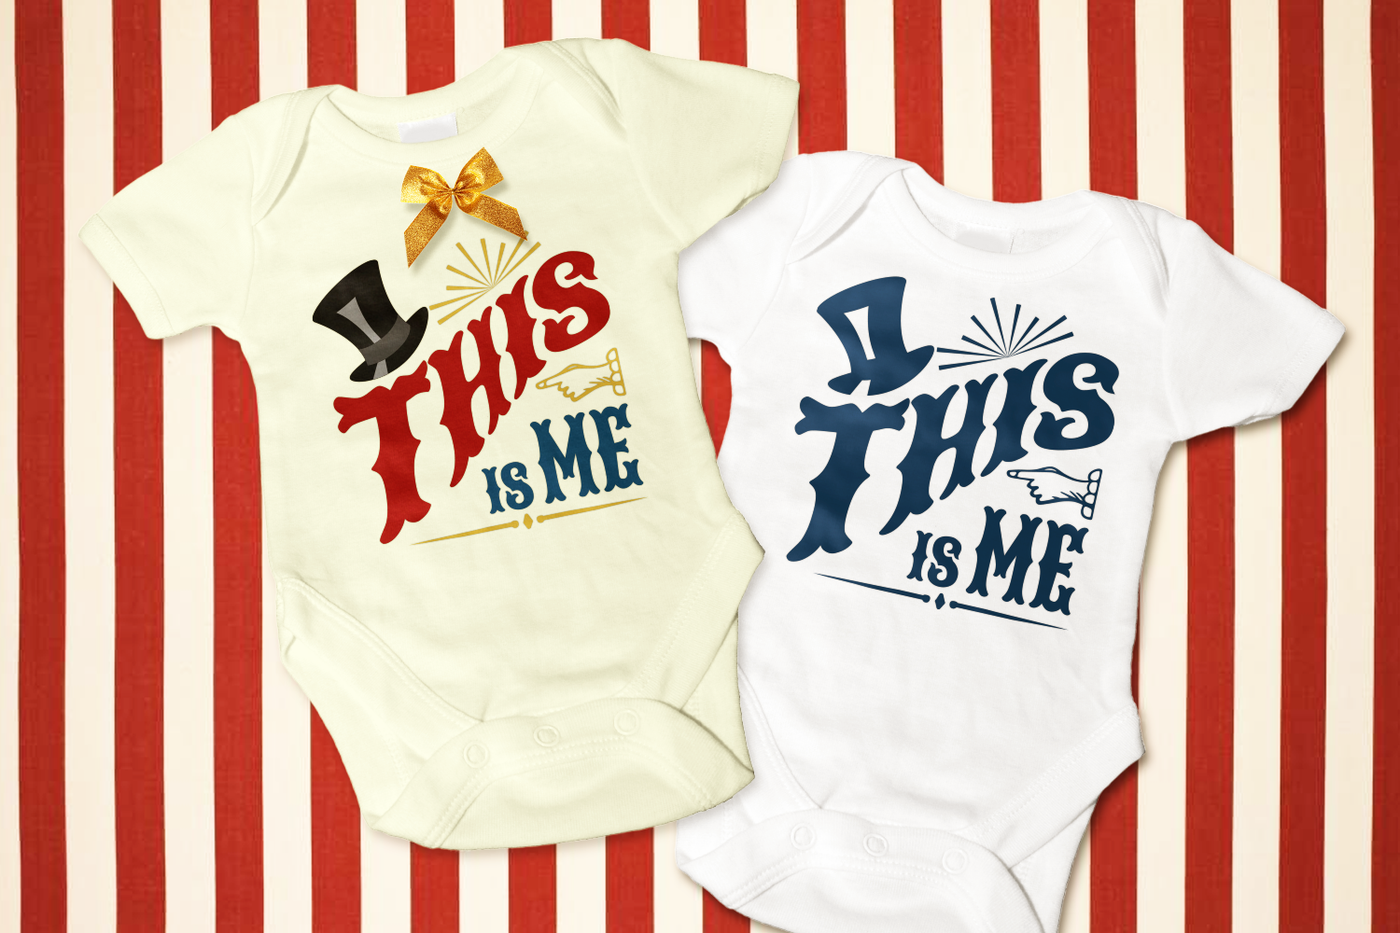 Two baby onesies on an ivory and red striped background. Each has the phrase "This is me" with a top hat, old-fashioned pointing hand graphic, and other decorative elements. One is done in many colors, the other is done in a single color.